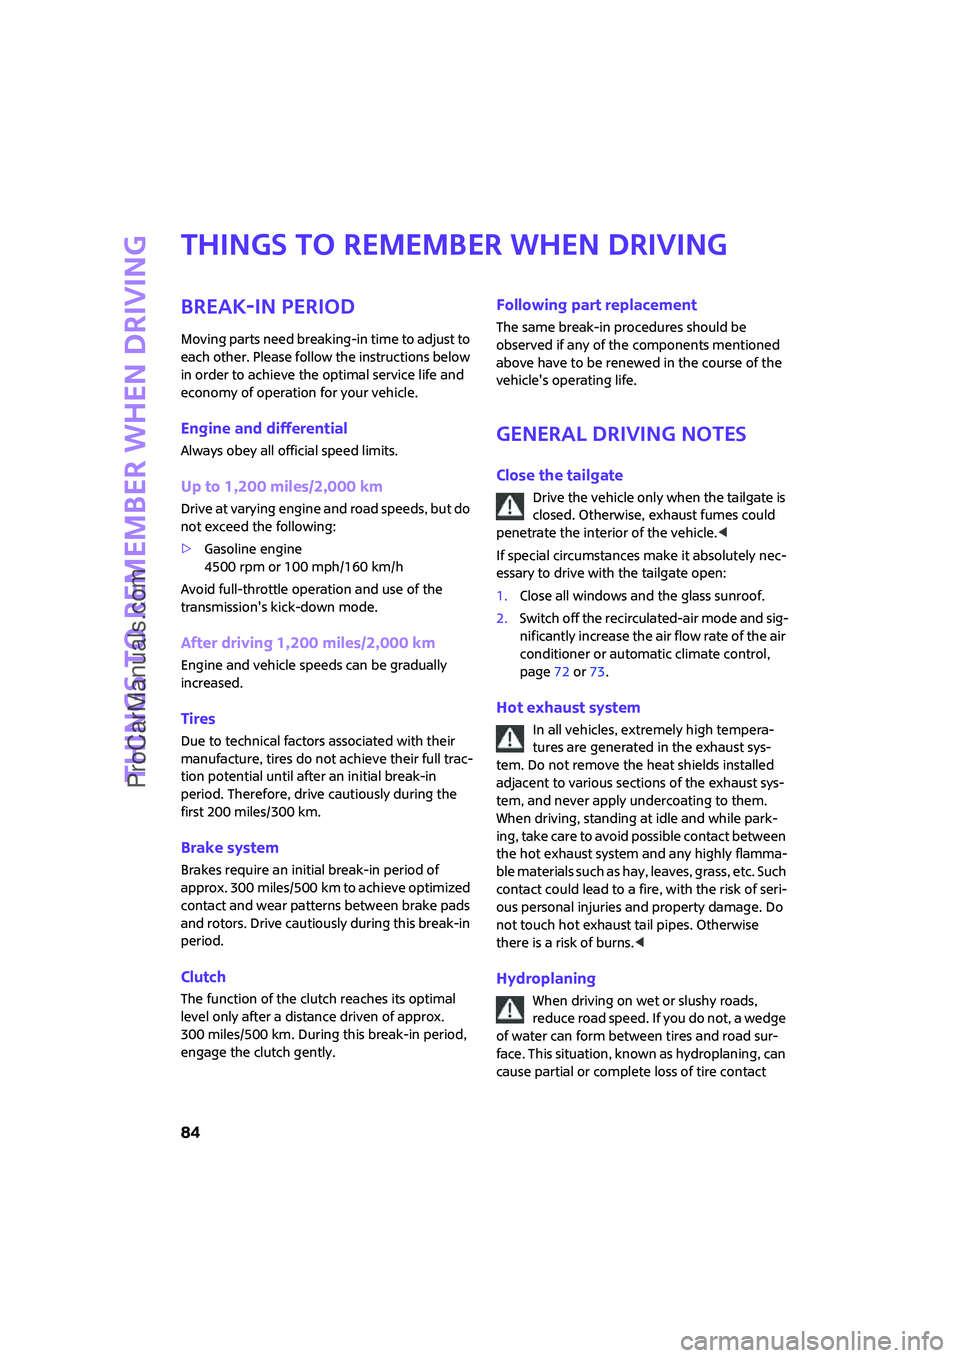 MINI COOPER 2008  Owners Manual Things to remember when driving
84
Things to remember when driving
Break-in period
Moving parts need breaking-in time to adjust to 
each other. Please follow the instructions below 
in order to achiev